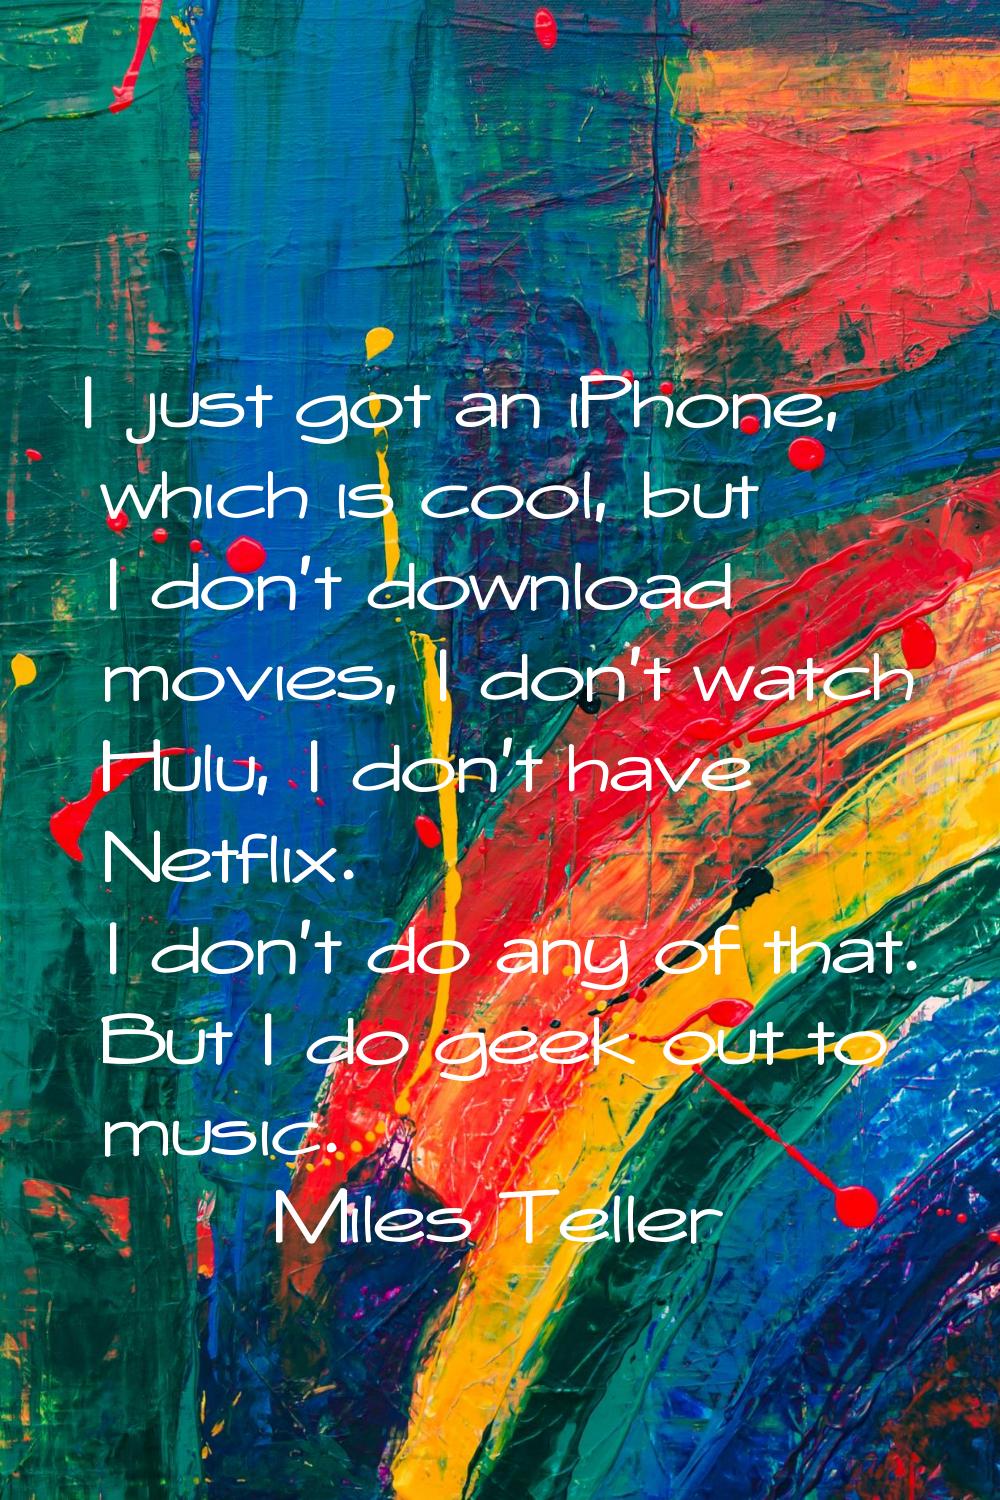 I just got an iPhone, which is cool, but I don't download movies, I don't watch Hulu, I don't have 